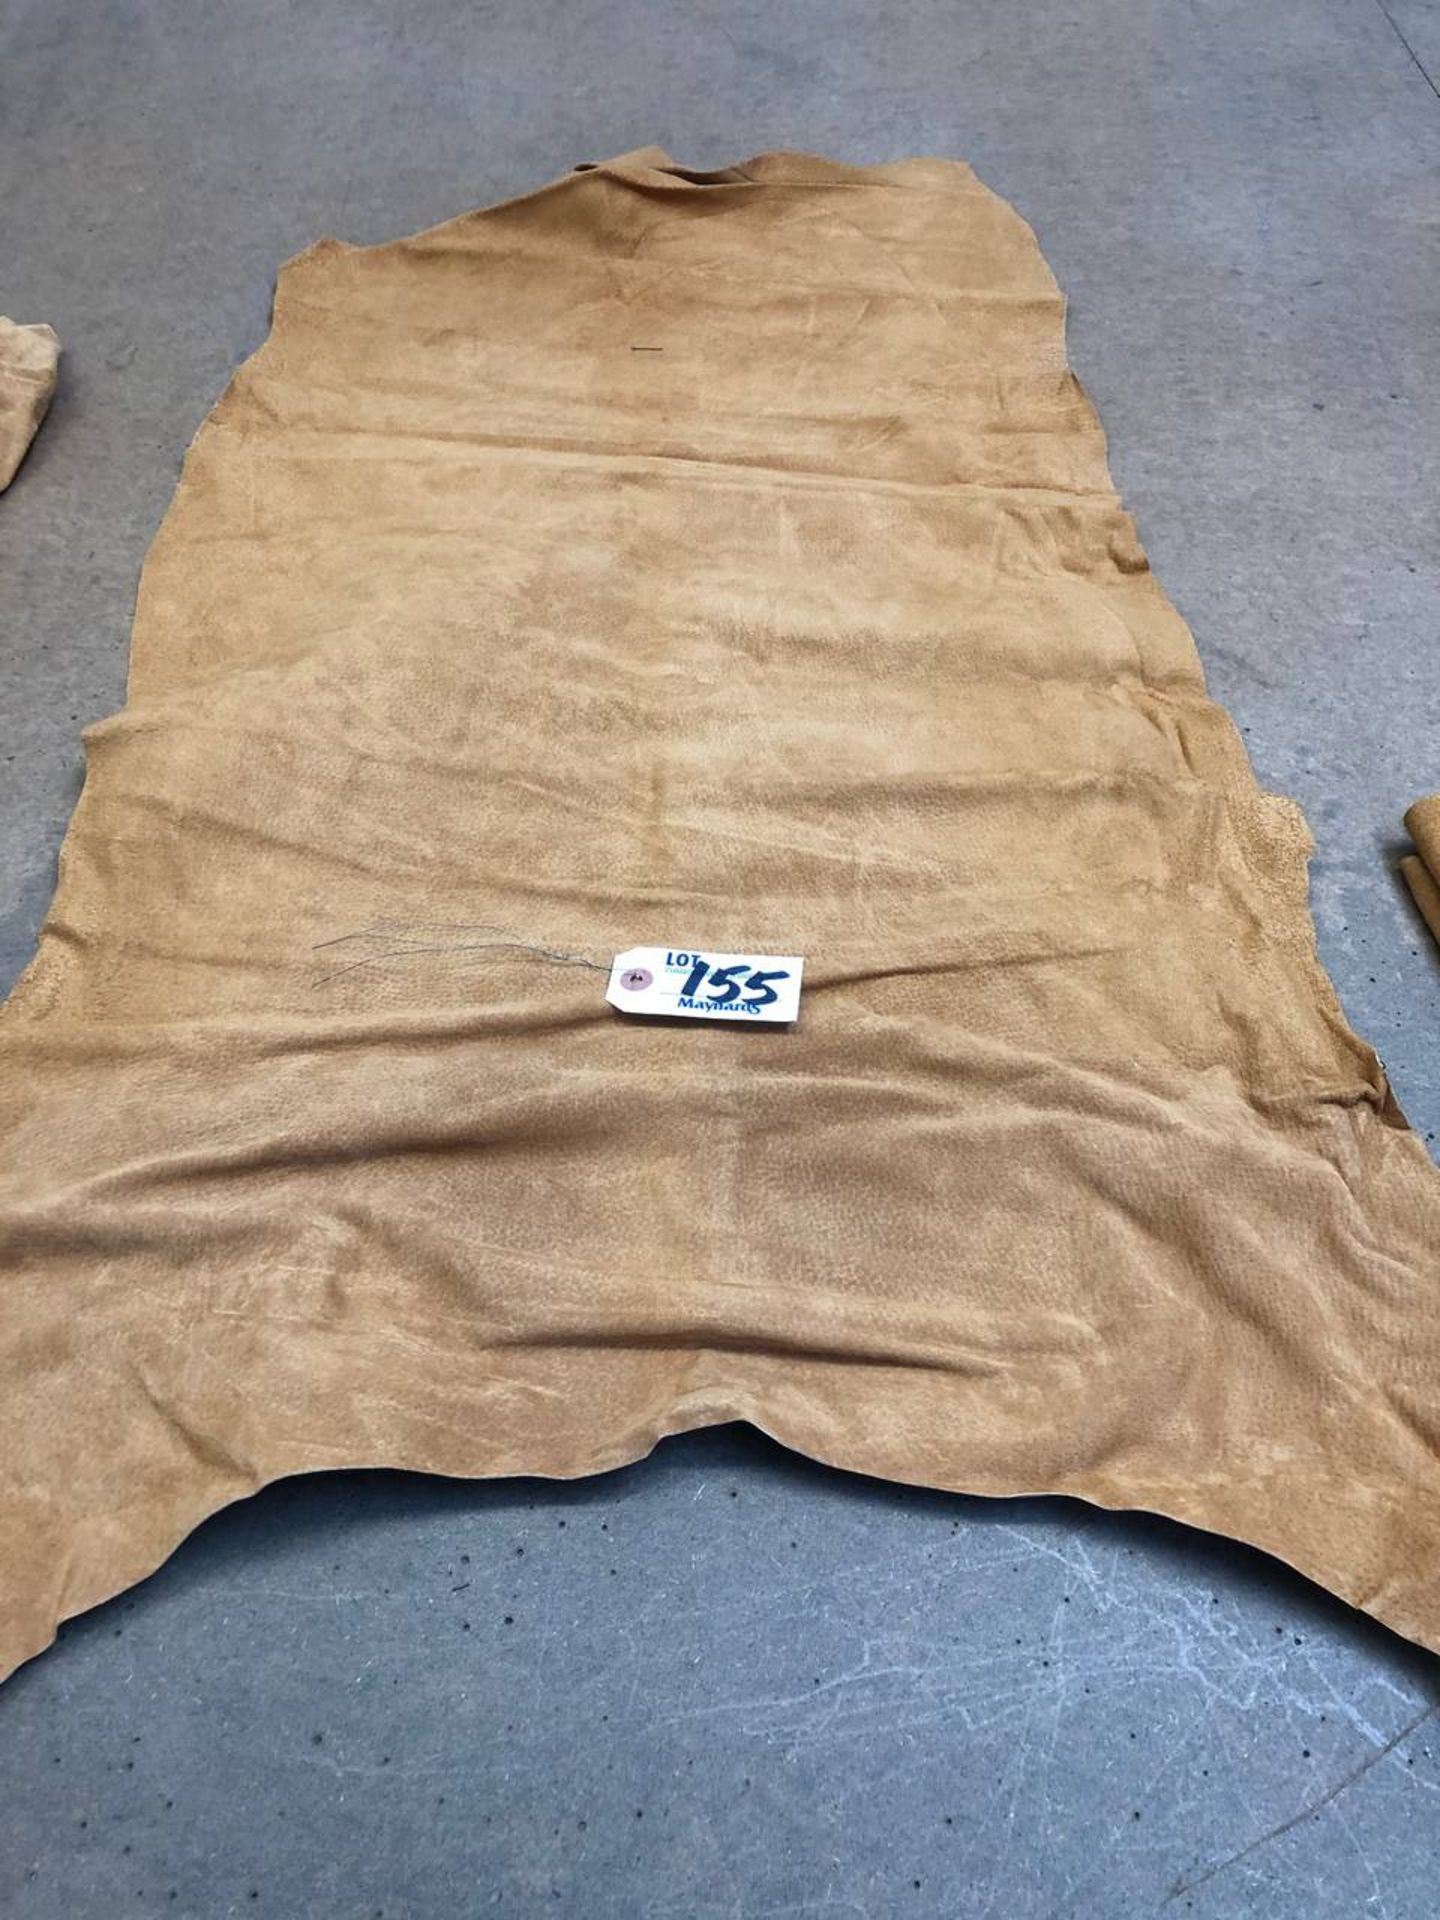 Lot of (4) suede leather skins - tan - Image 2 of 4